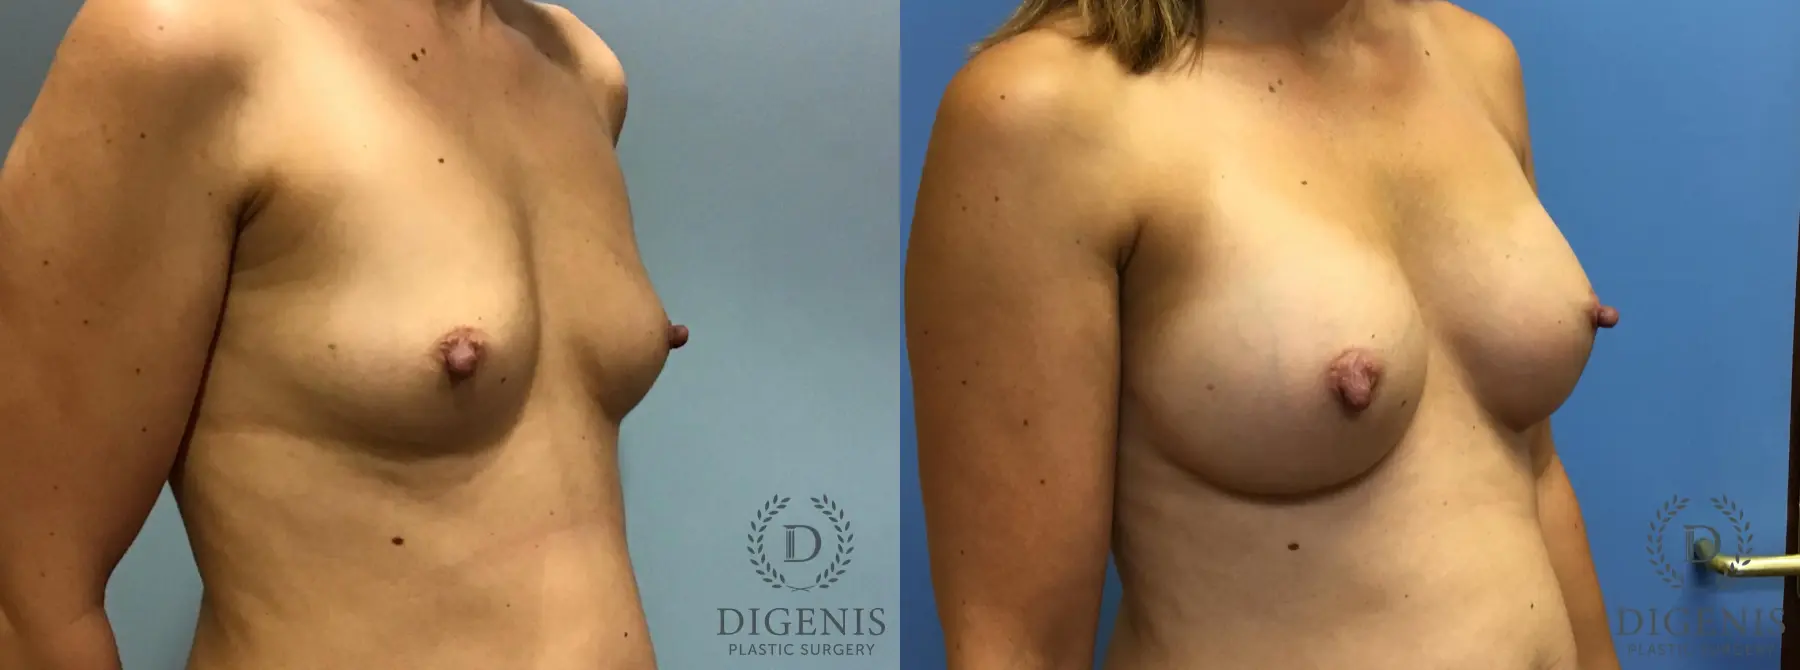 Breast Augmentation: Patient 9 - Before and After 2